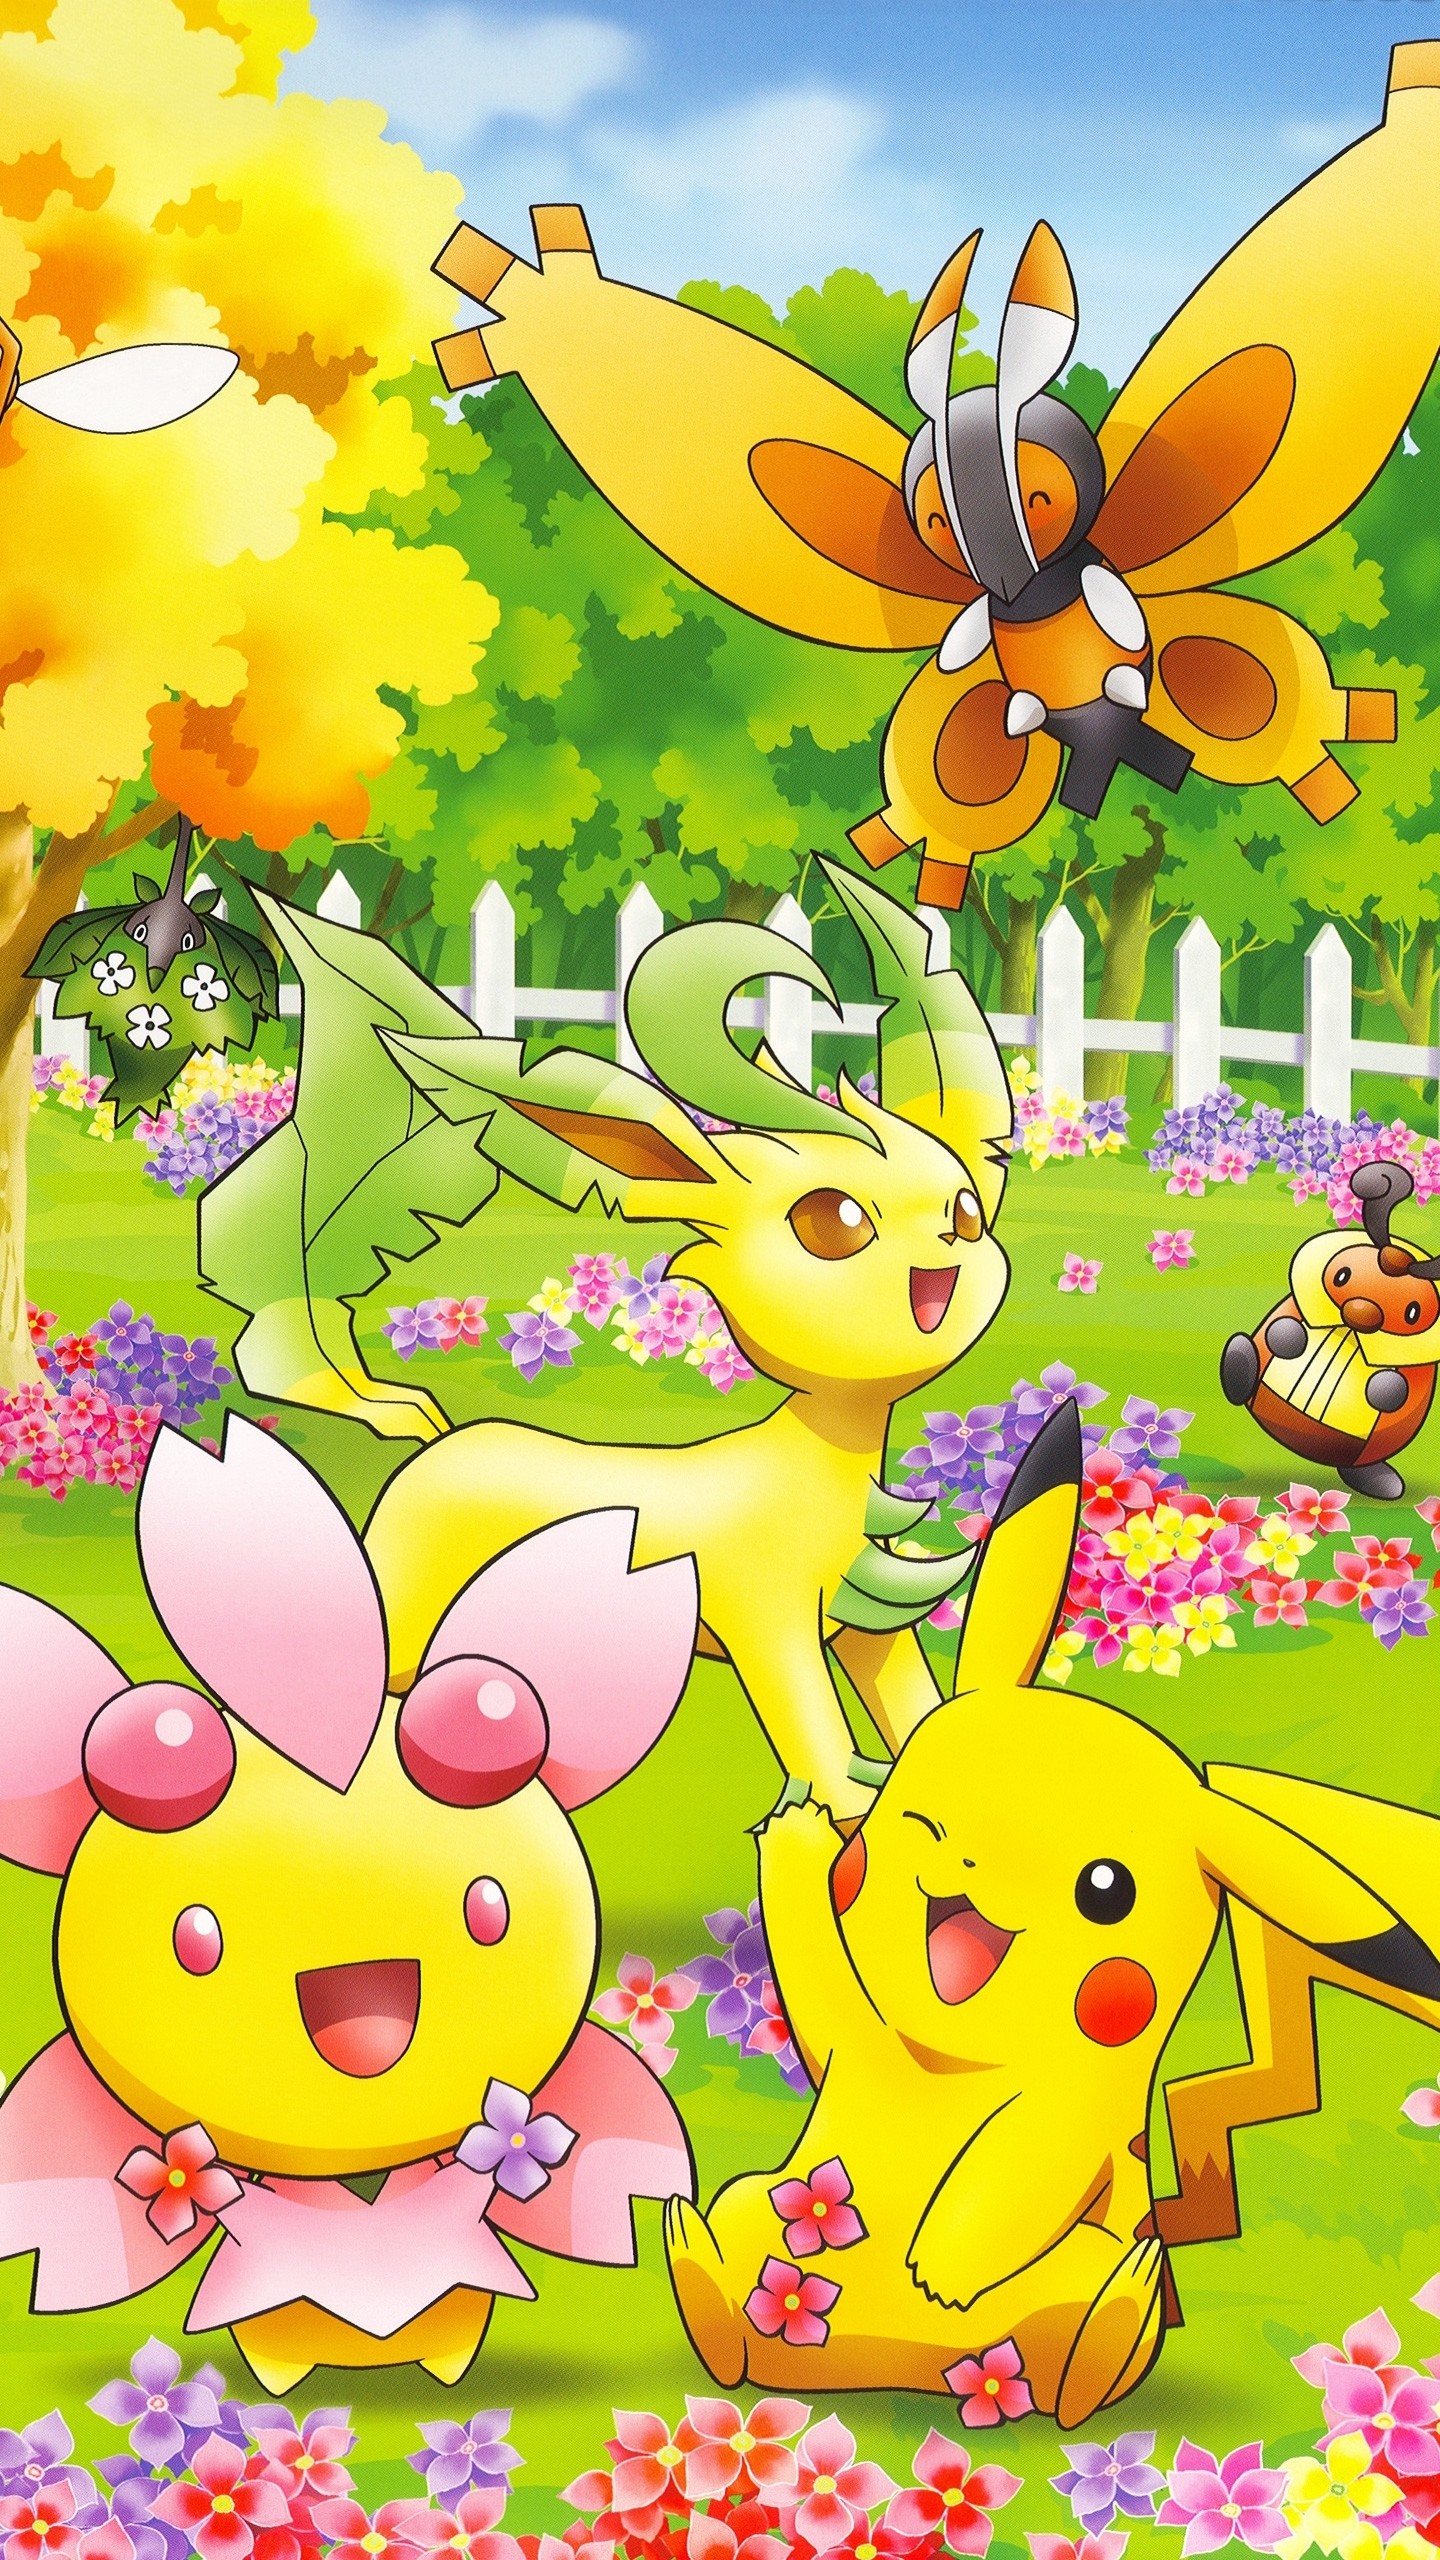 1440x2560 ... Cute Pokemon characters Game mobile wallpaper